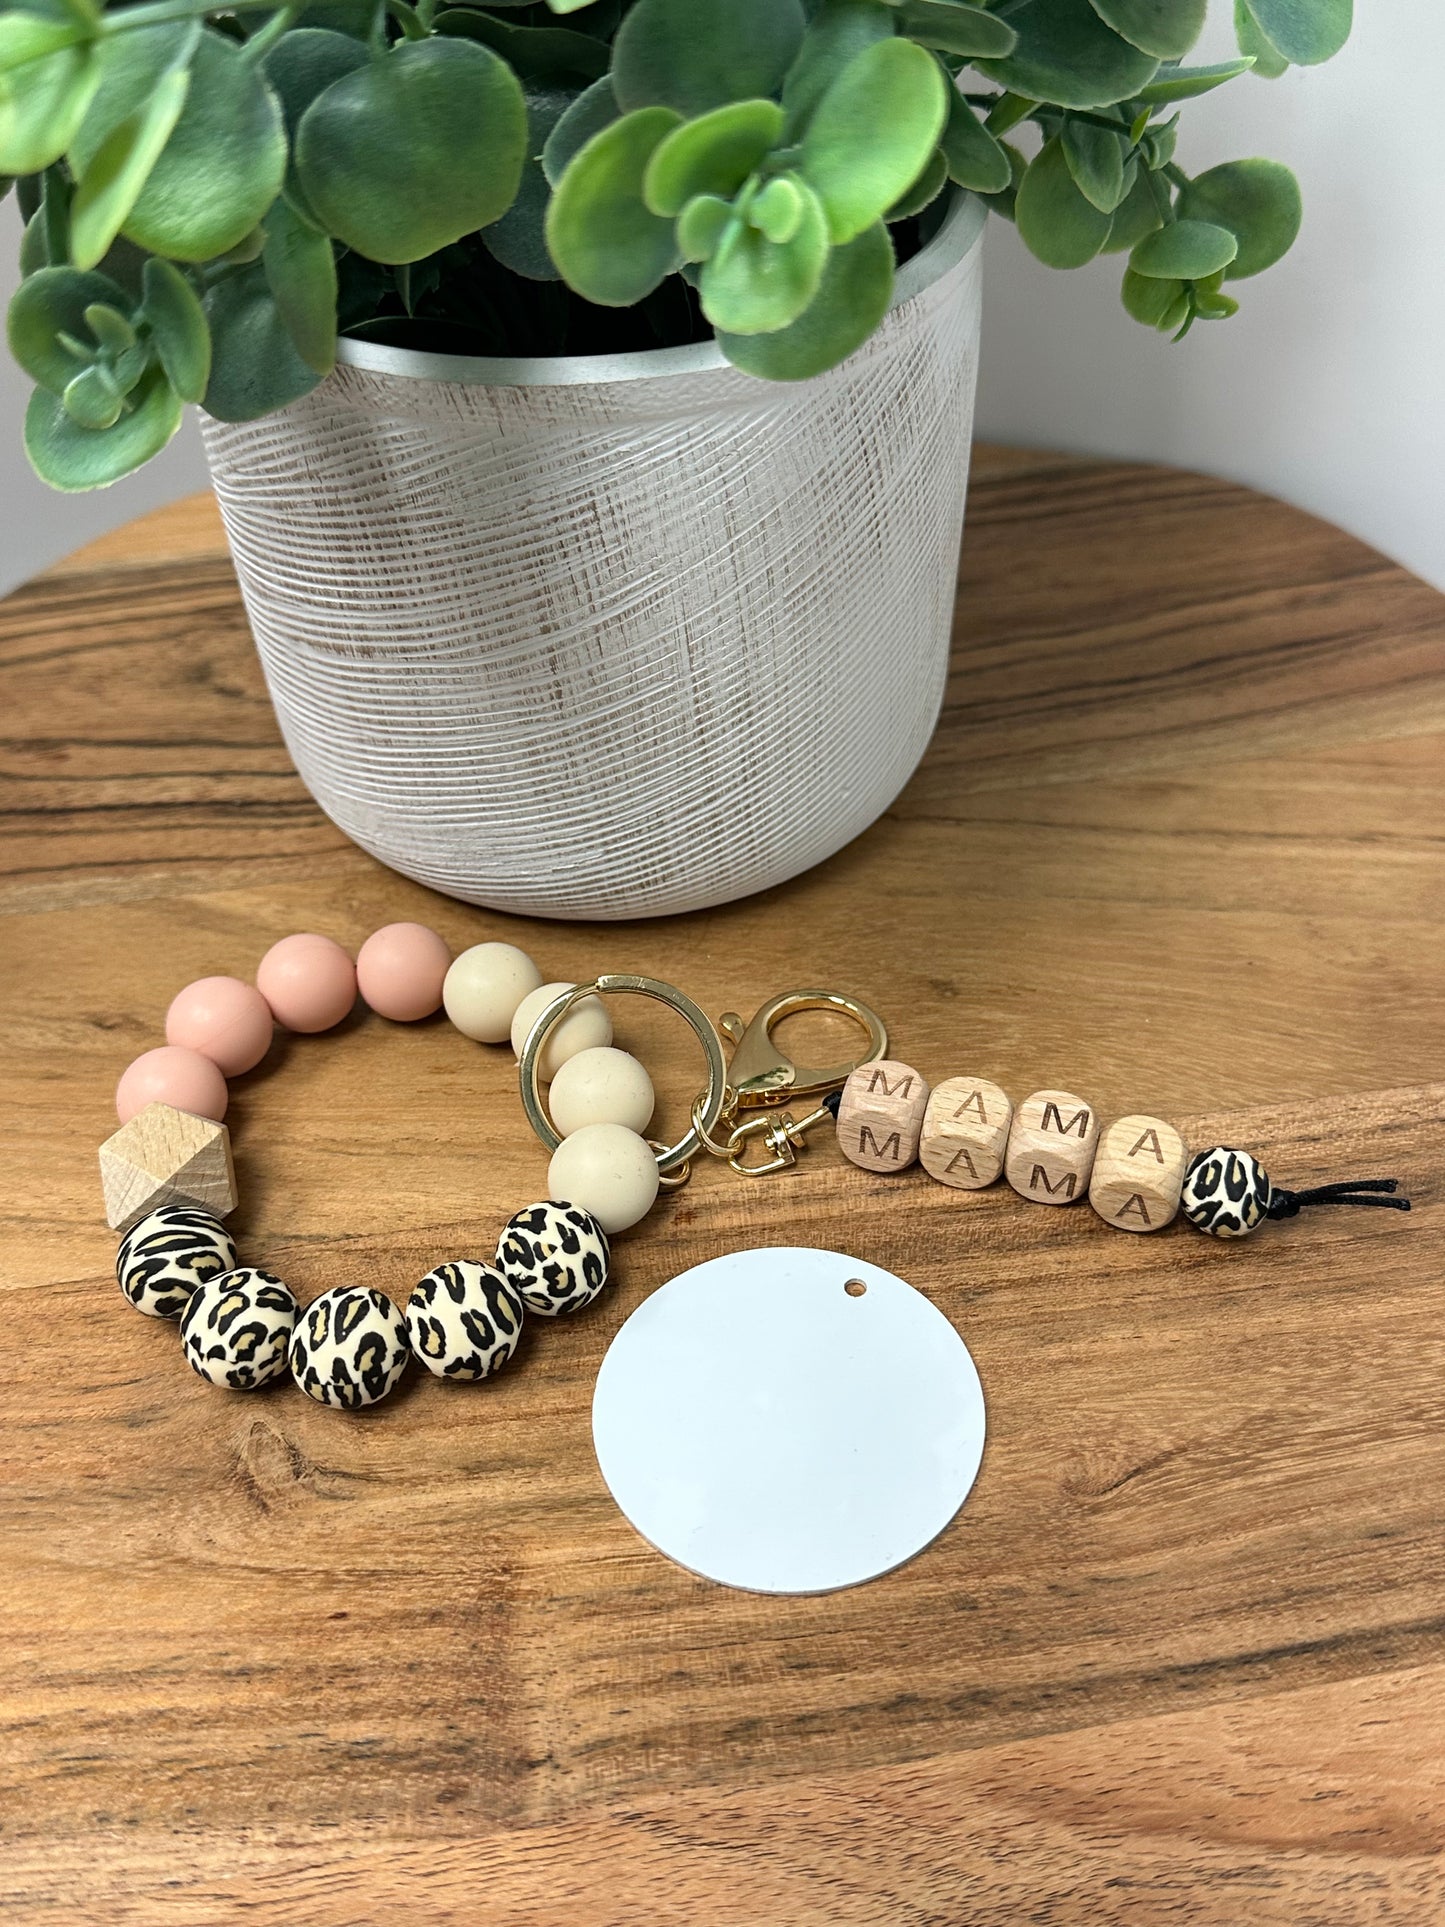 NEW Leopard Bracelet With MAMA Wood Tassel and Aluminum Sublimation Disc